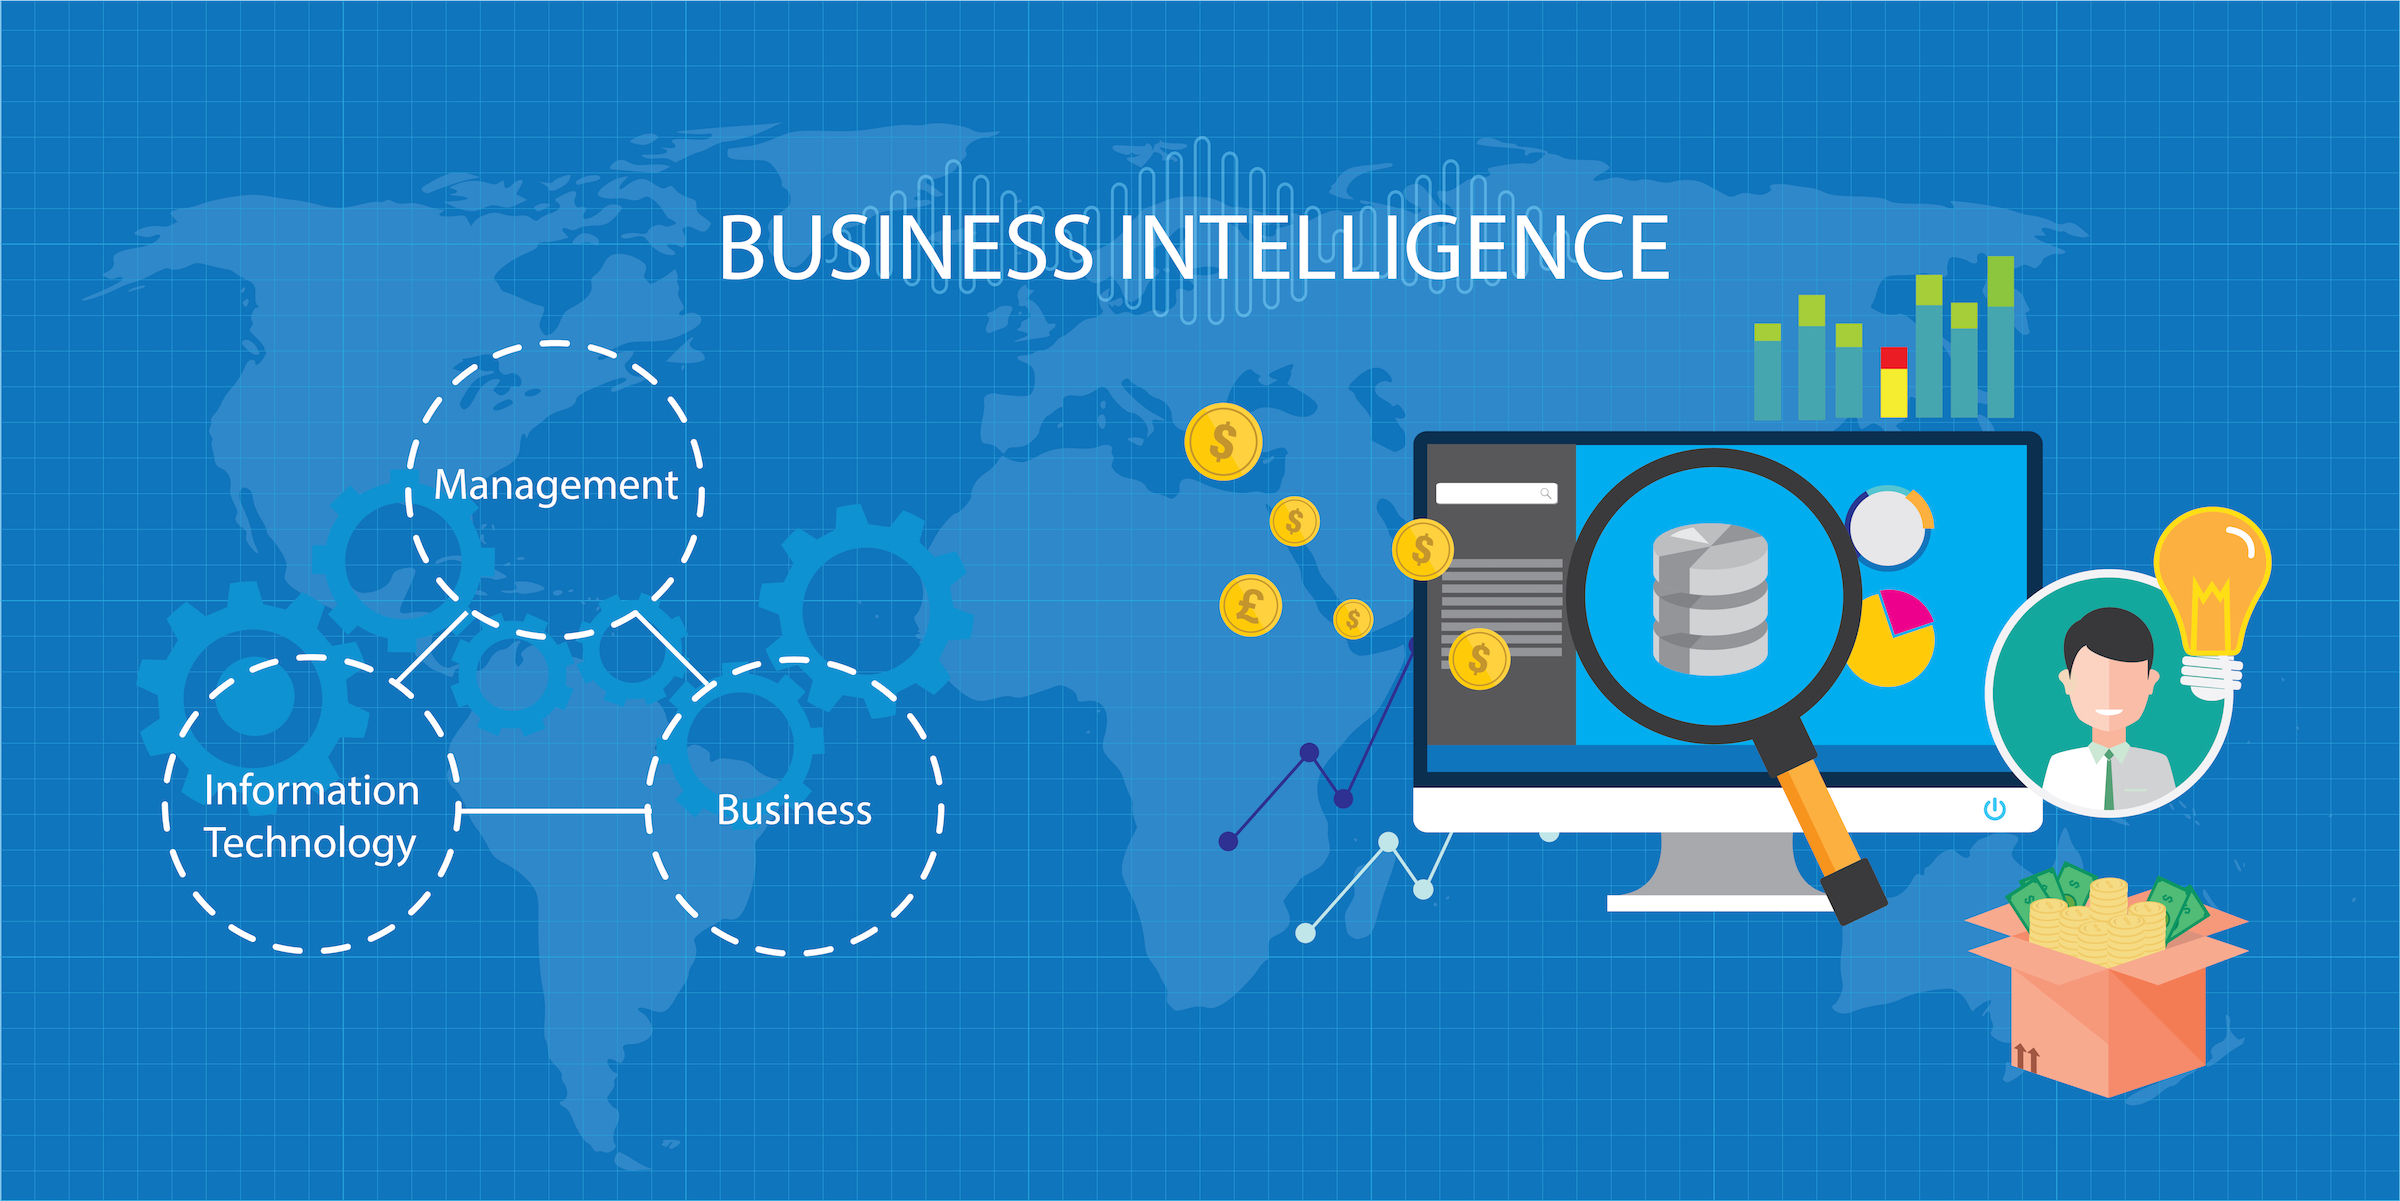 4 Business Intelligence Tools For Digital Marketers